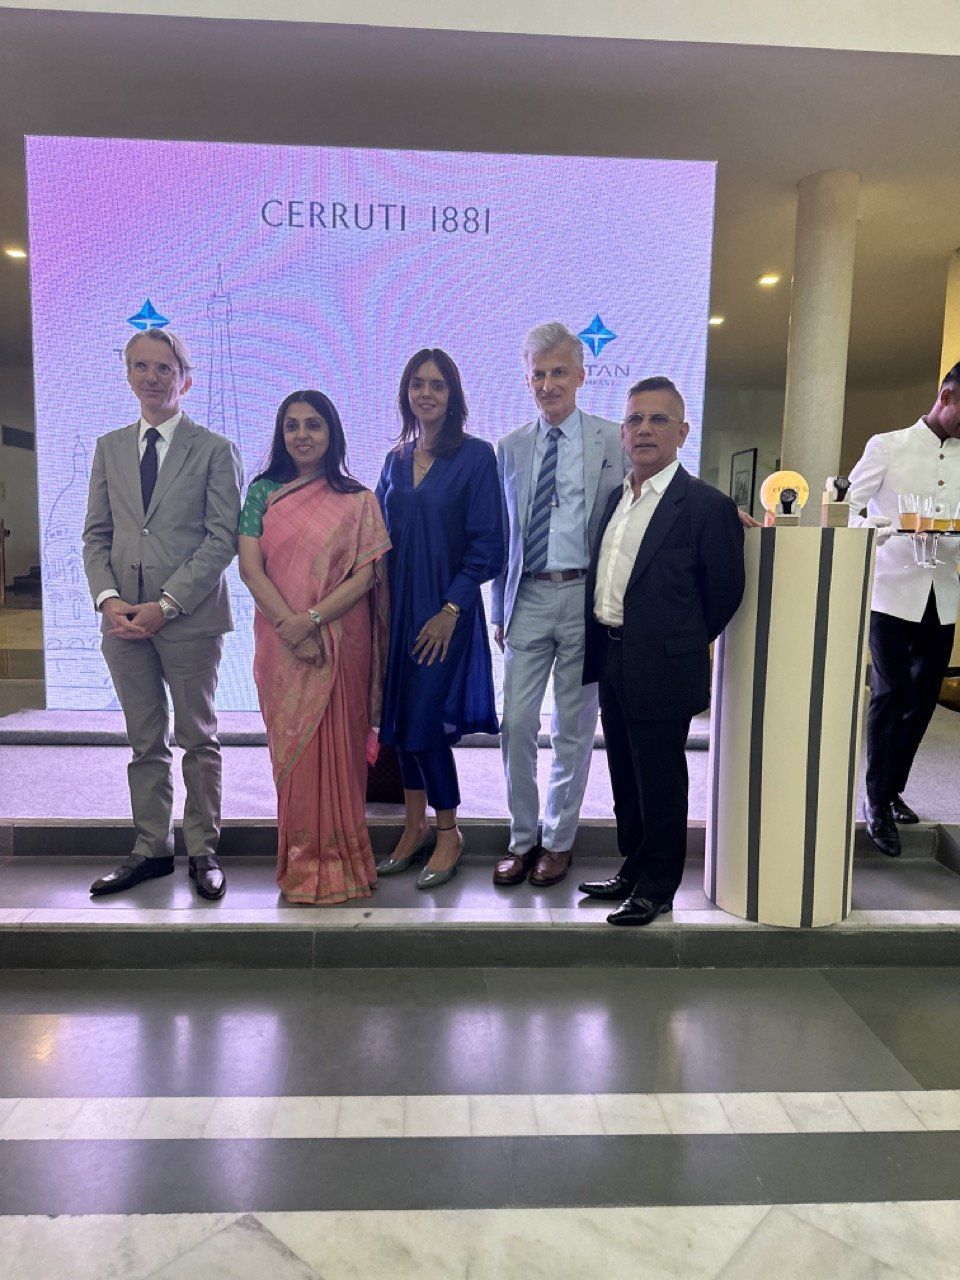 (left to right): His Excellency, Suparna Mitra, CEO Watches And Wearables Division, Titan, Karishma Karer, Founder At The Hour Markers, Emmanuel Lenain, Ambassador of France to India and Naresh Chainani, CEO of ILG